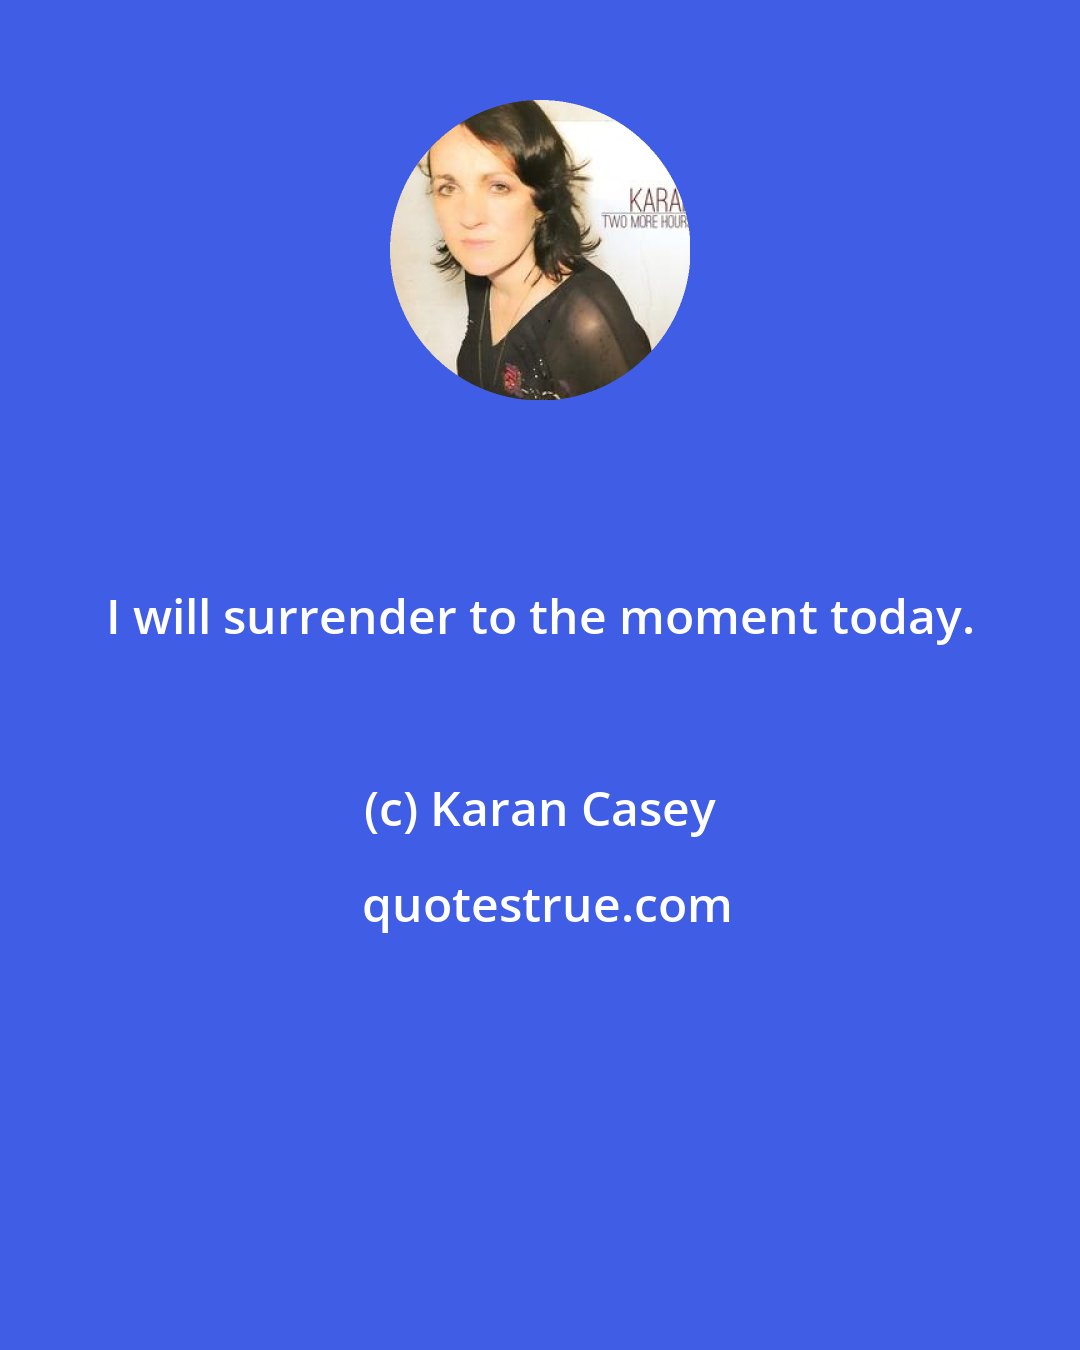 Karan Casey: I will surrender to the moment today.